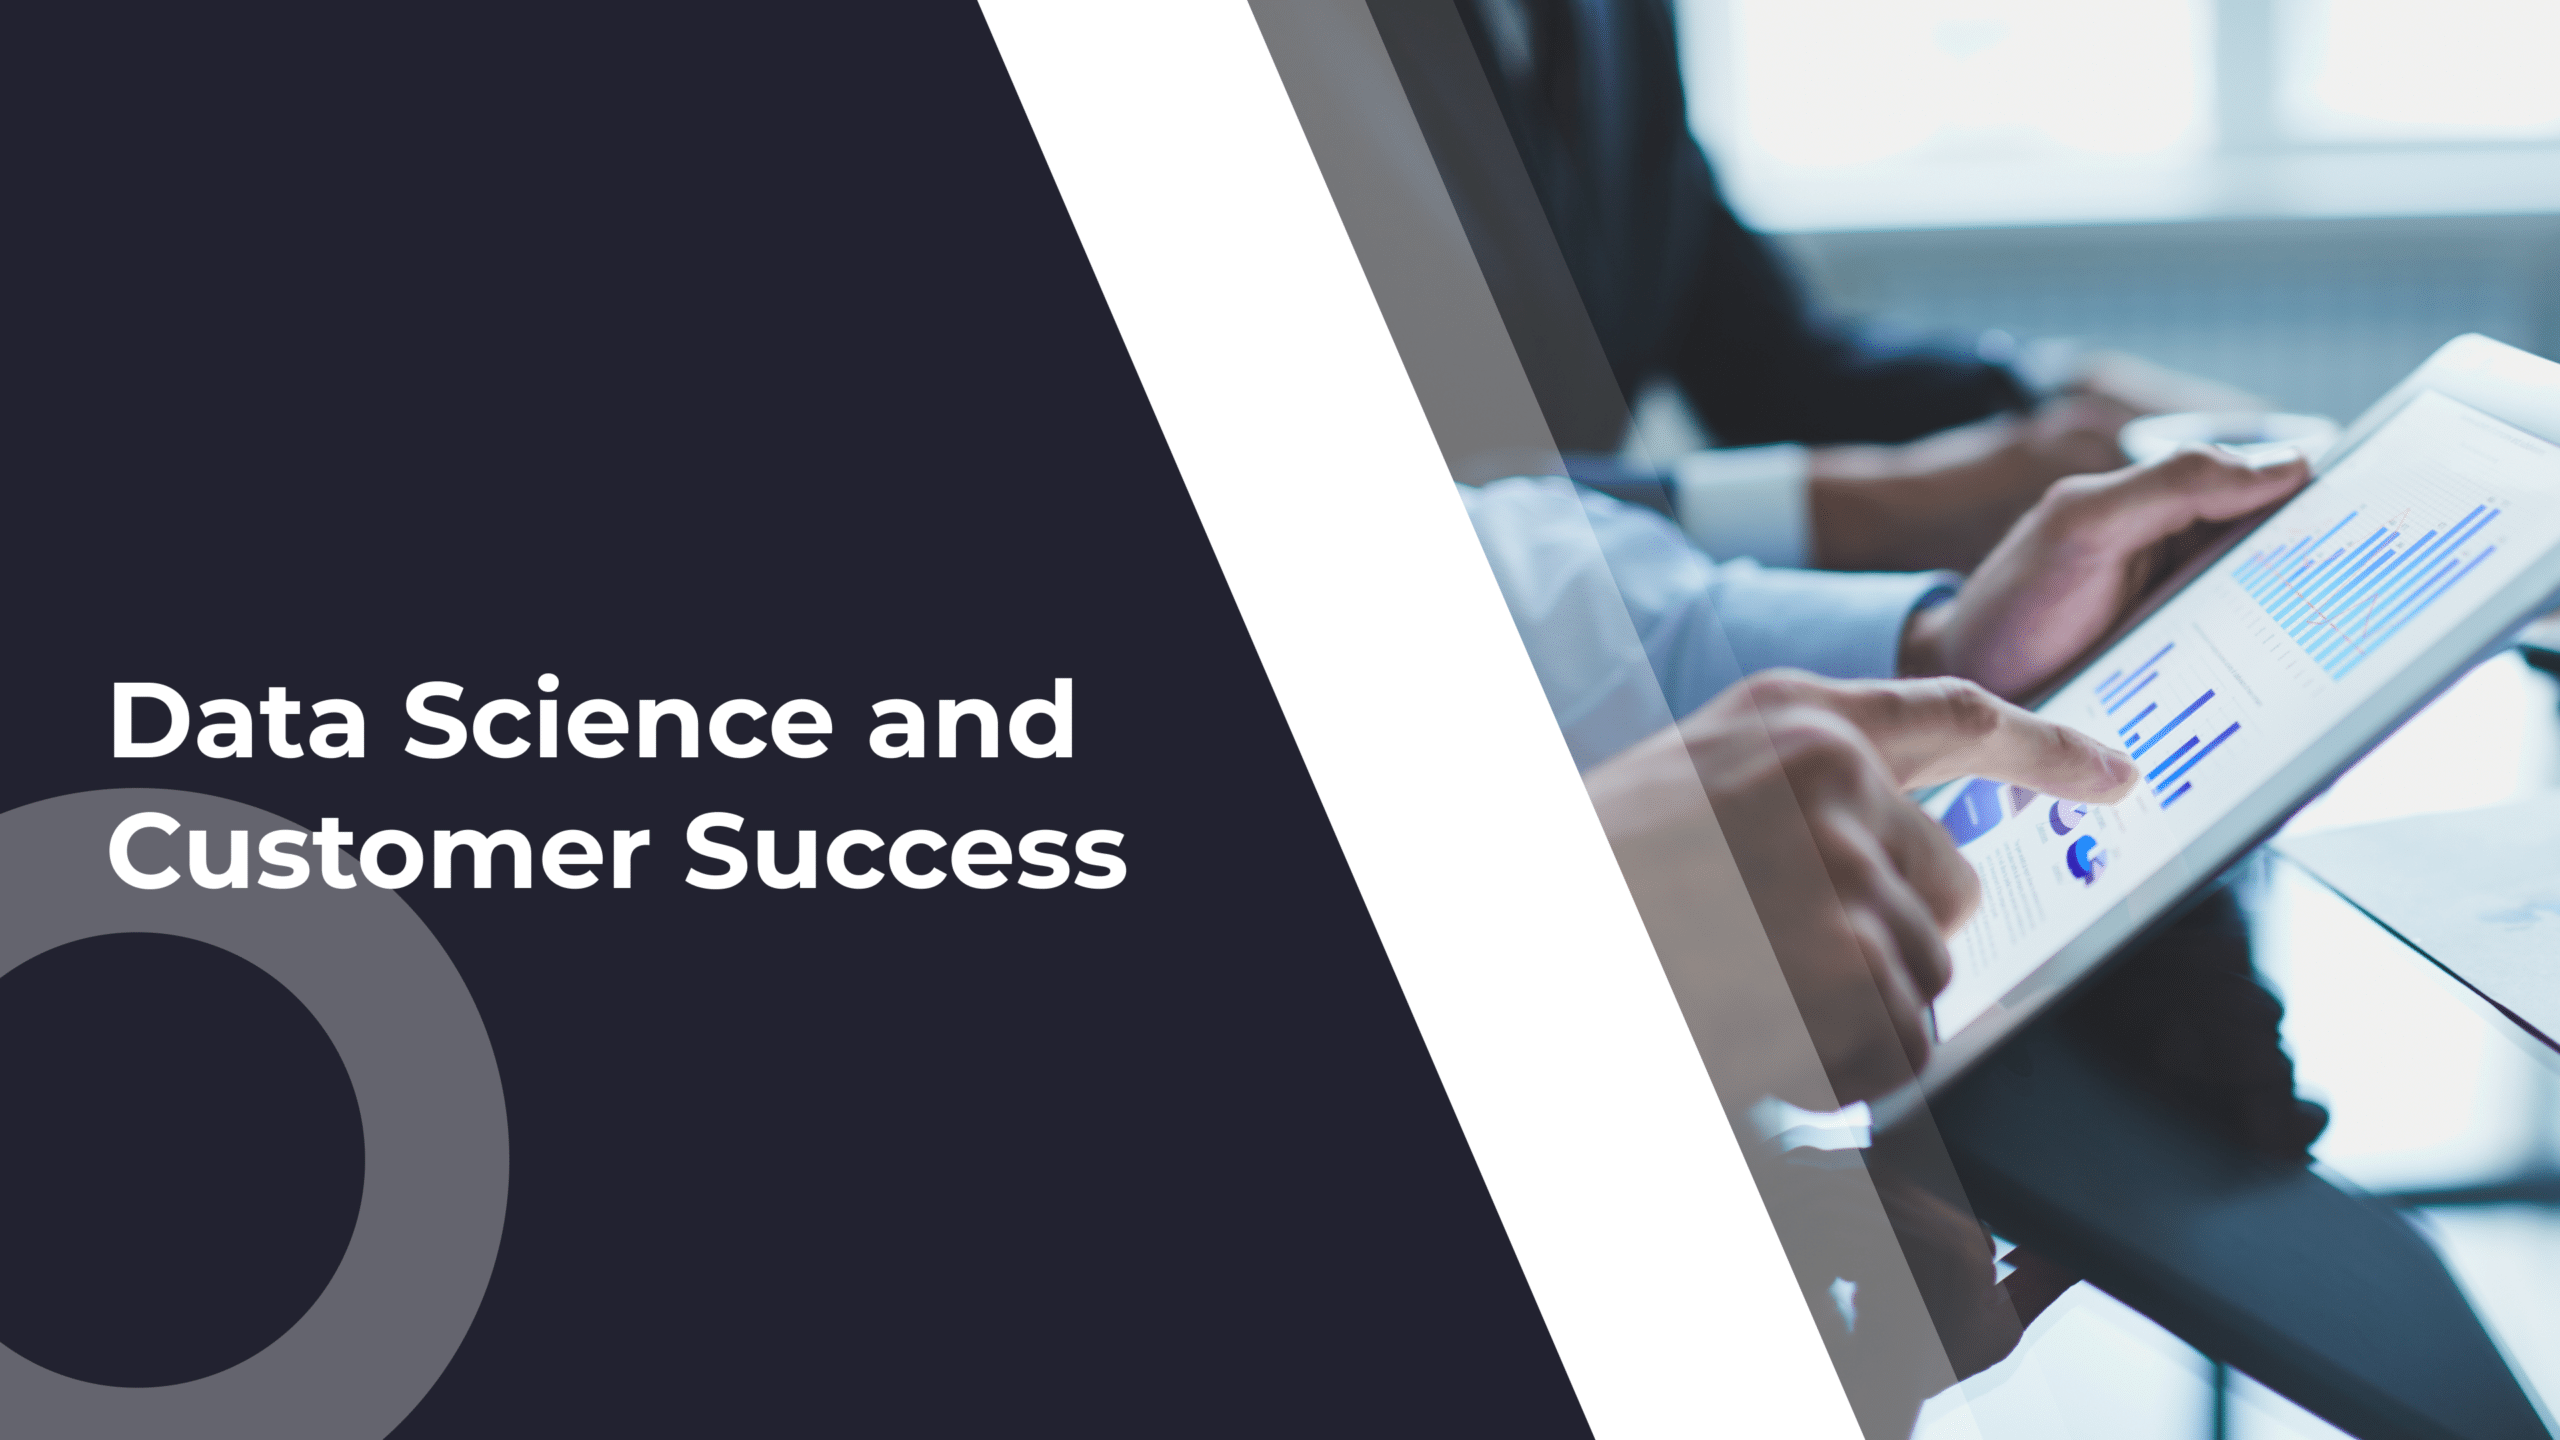 How a Data Science Strategy Can Help Customer Success and Support Teams